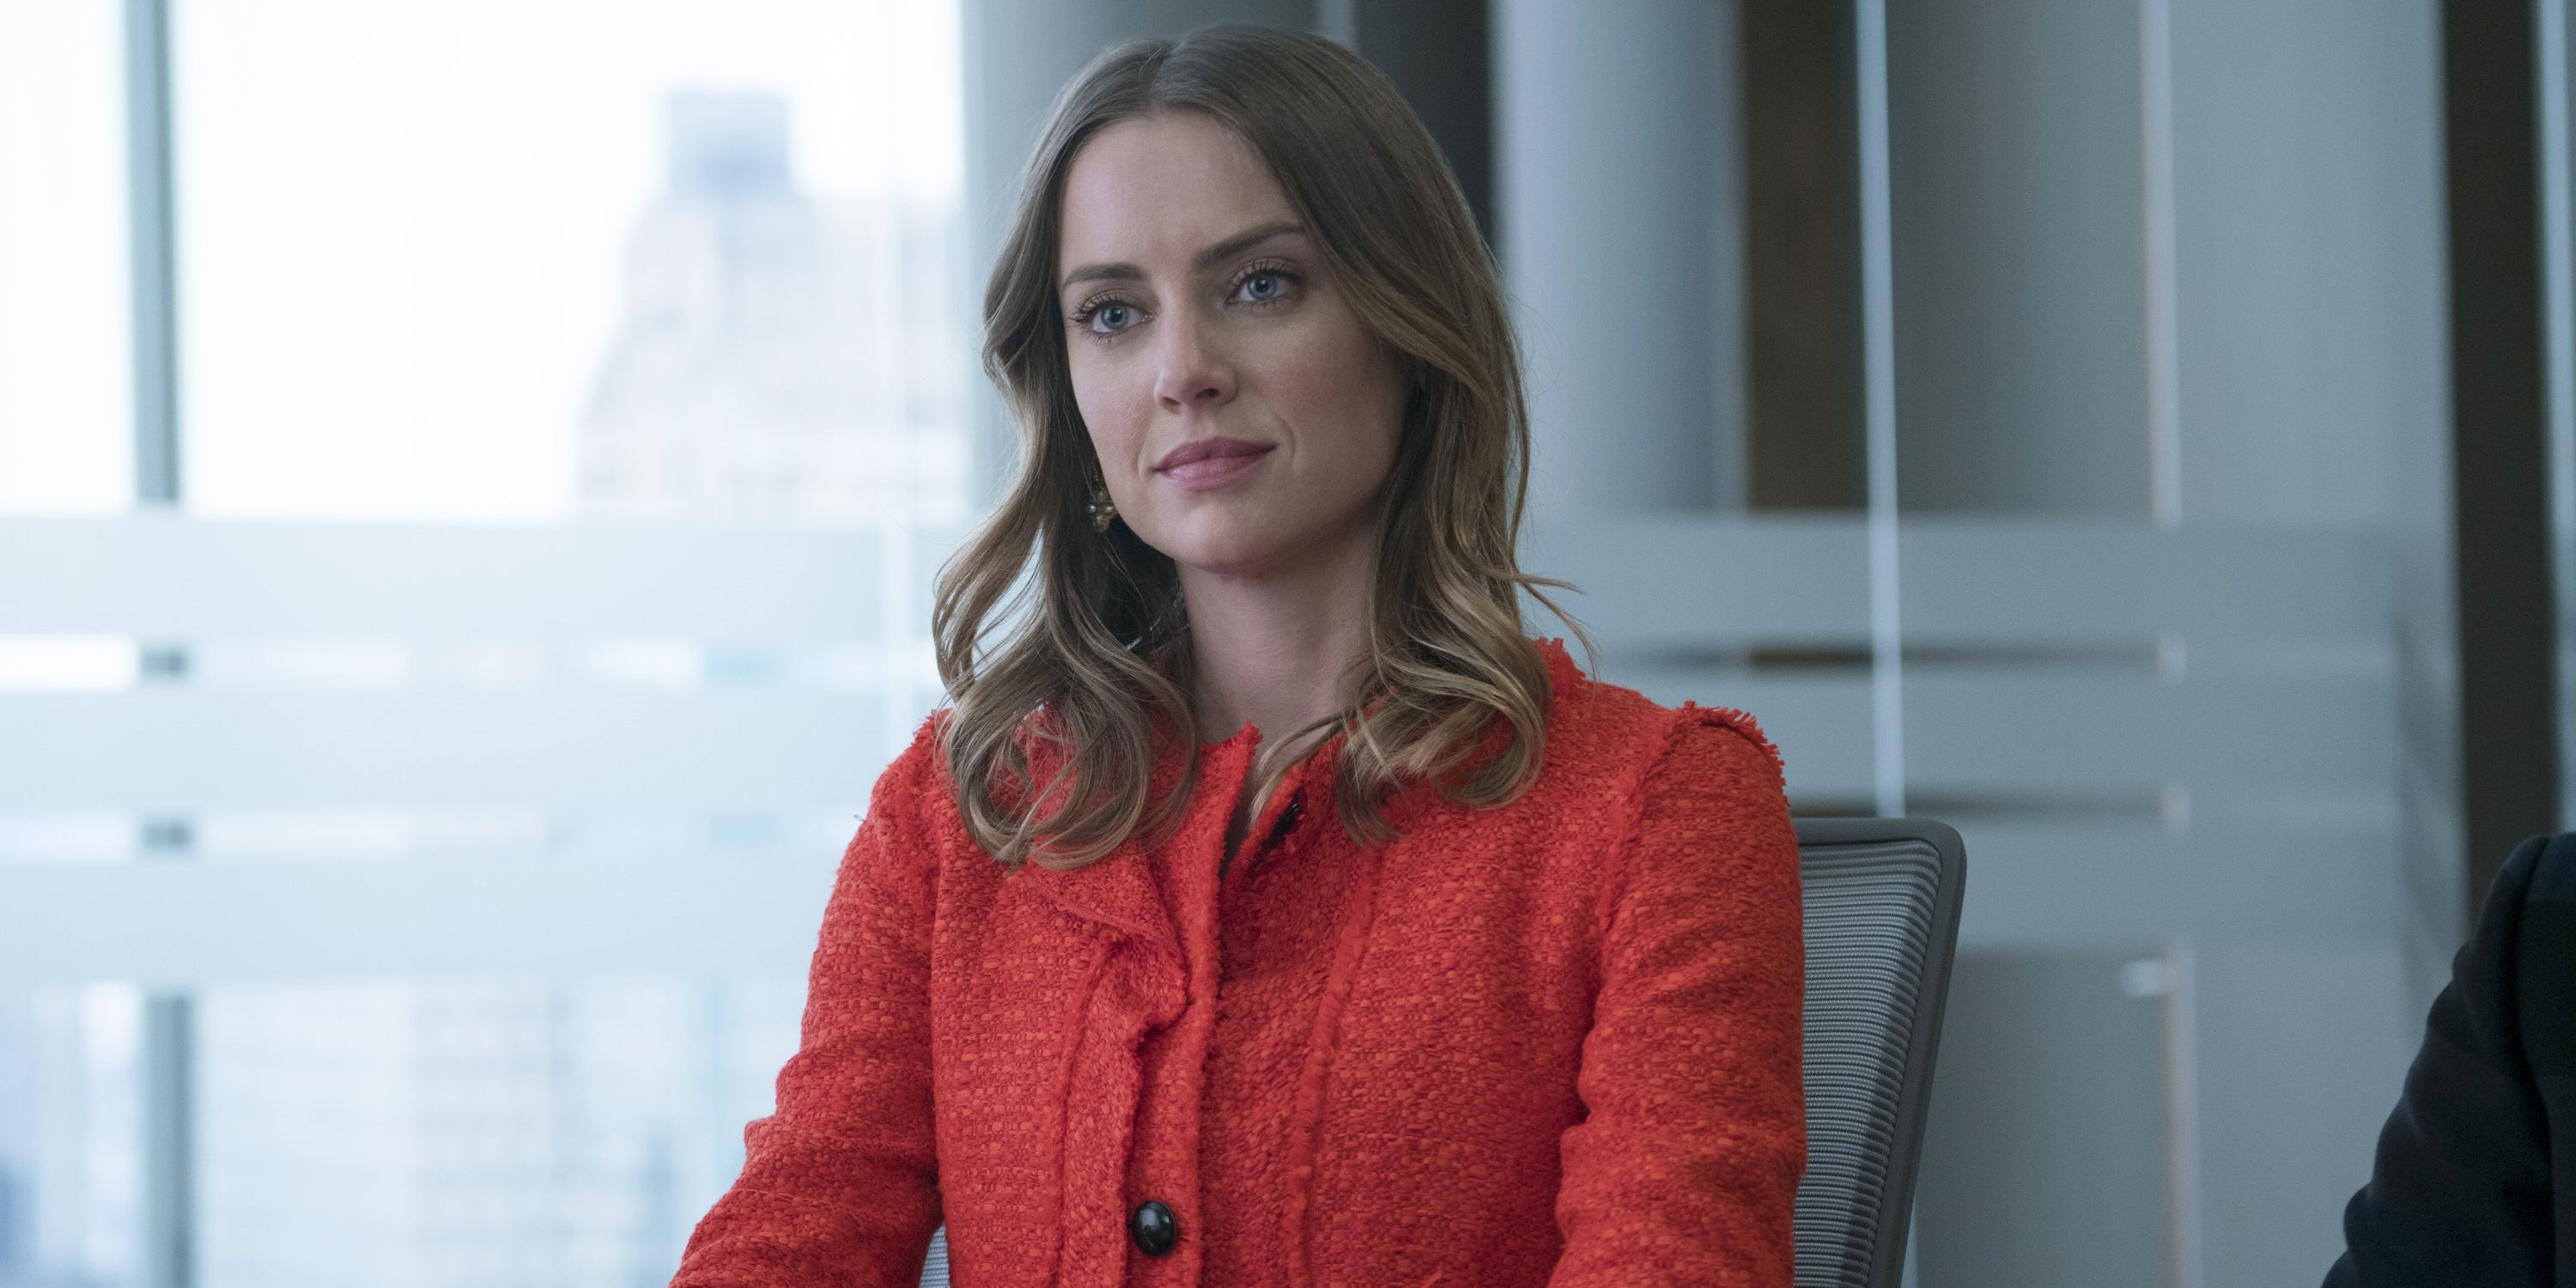 Joy Meachum sits in an office in Iron Fist